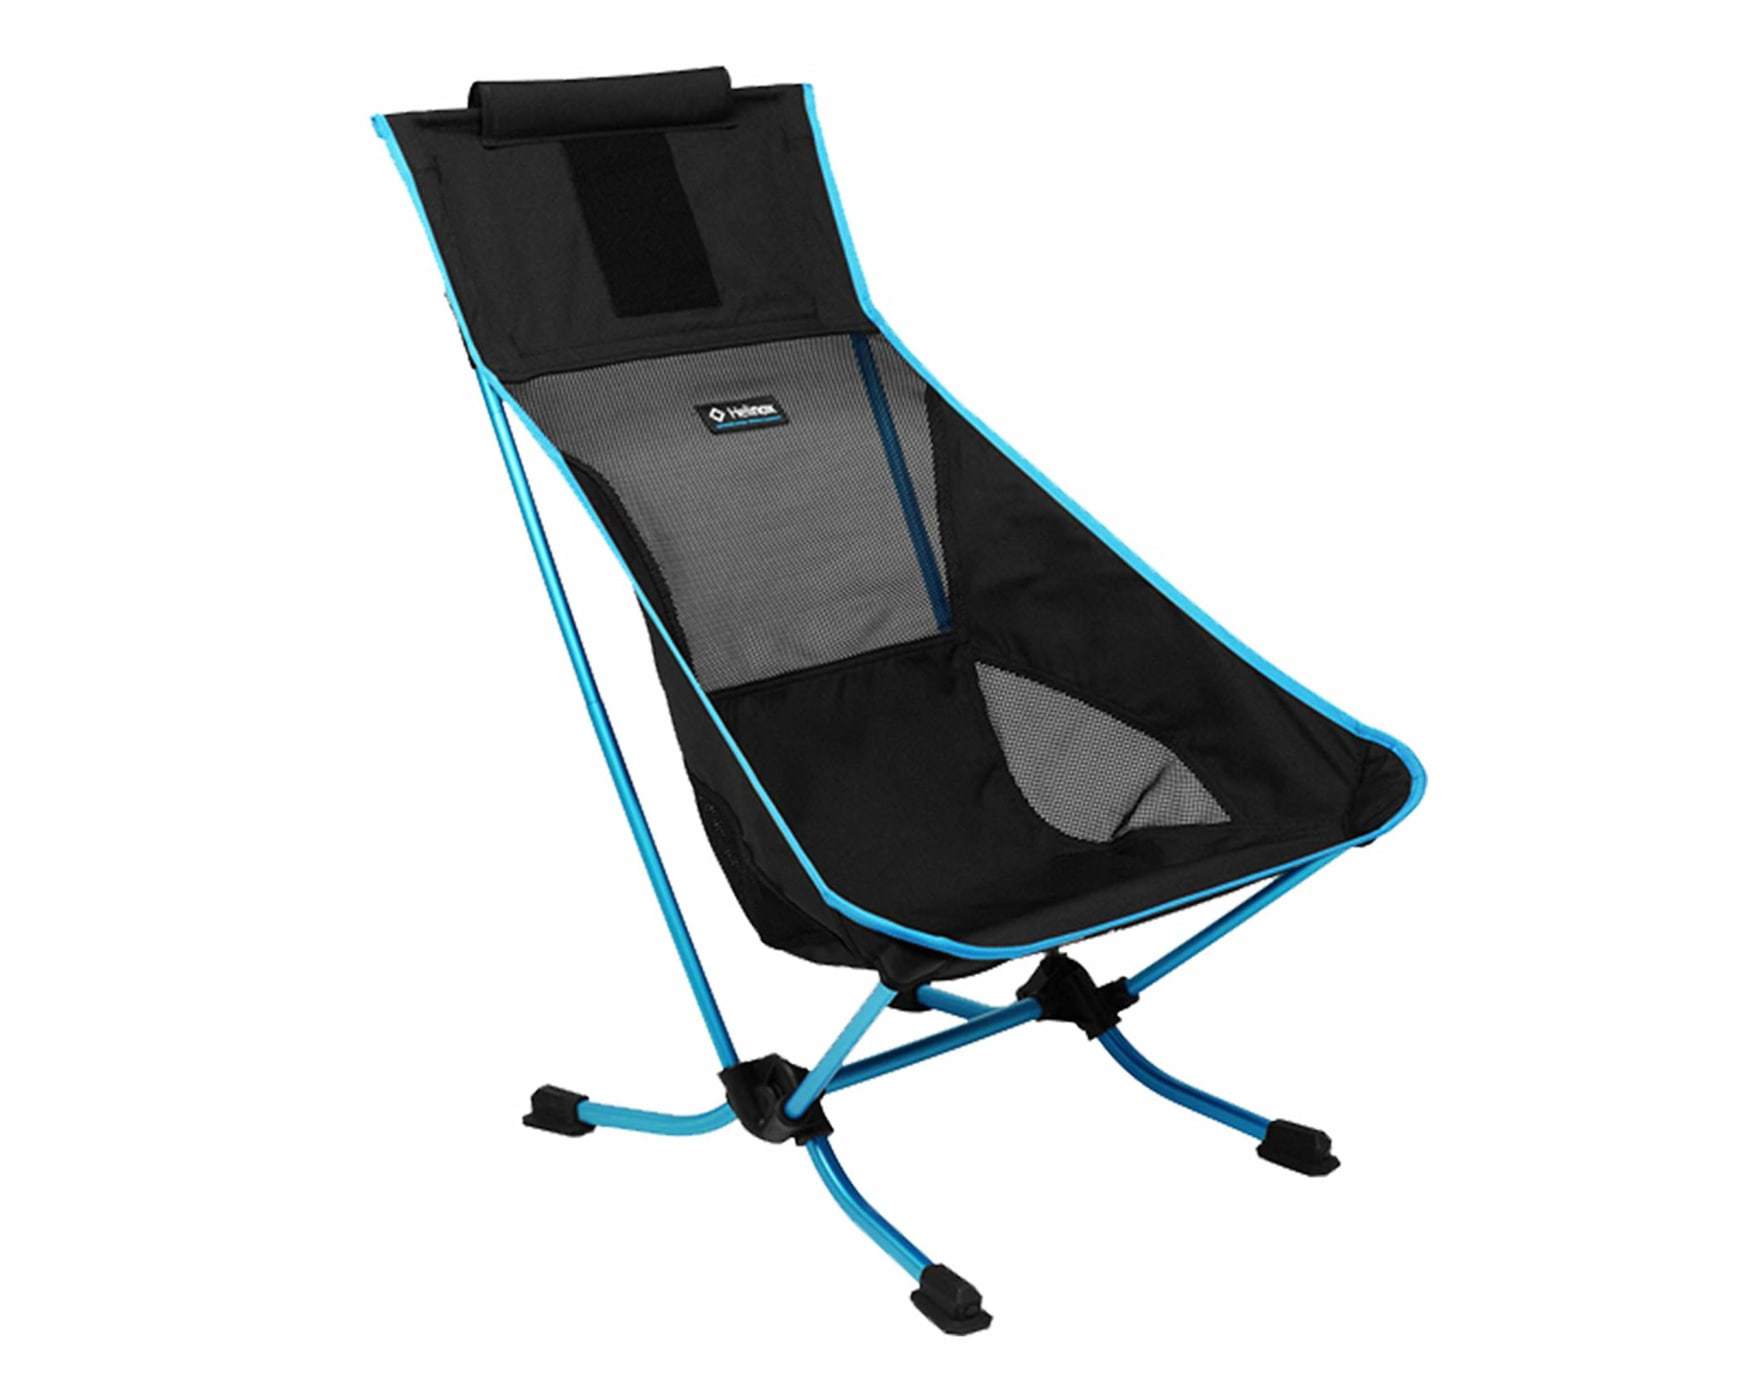 Helinox beach chair for camping gift